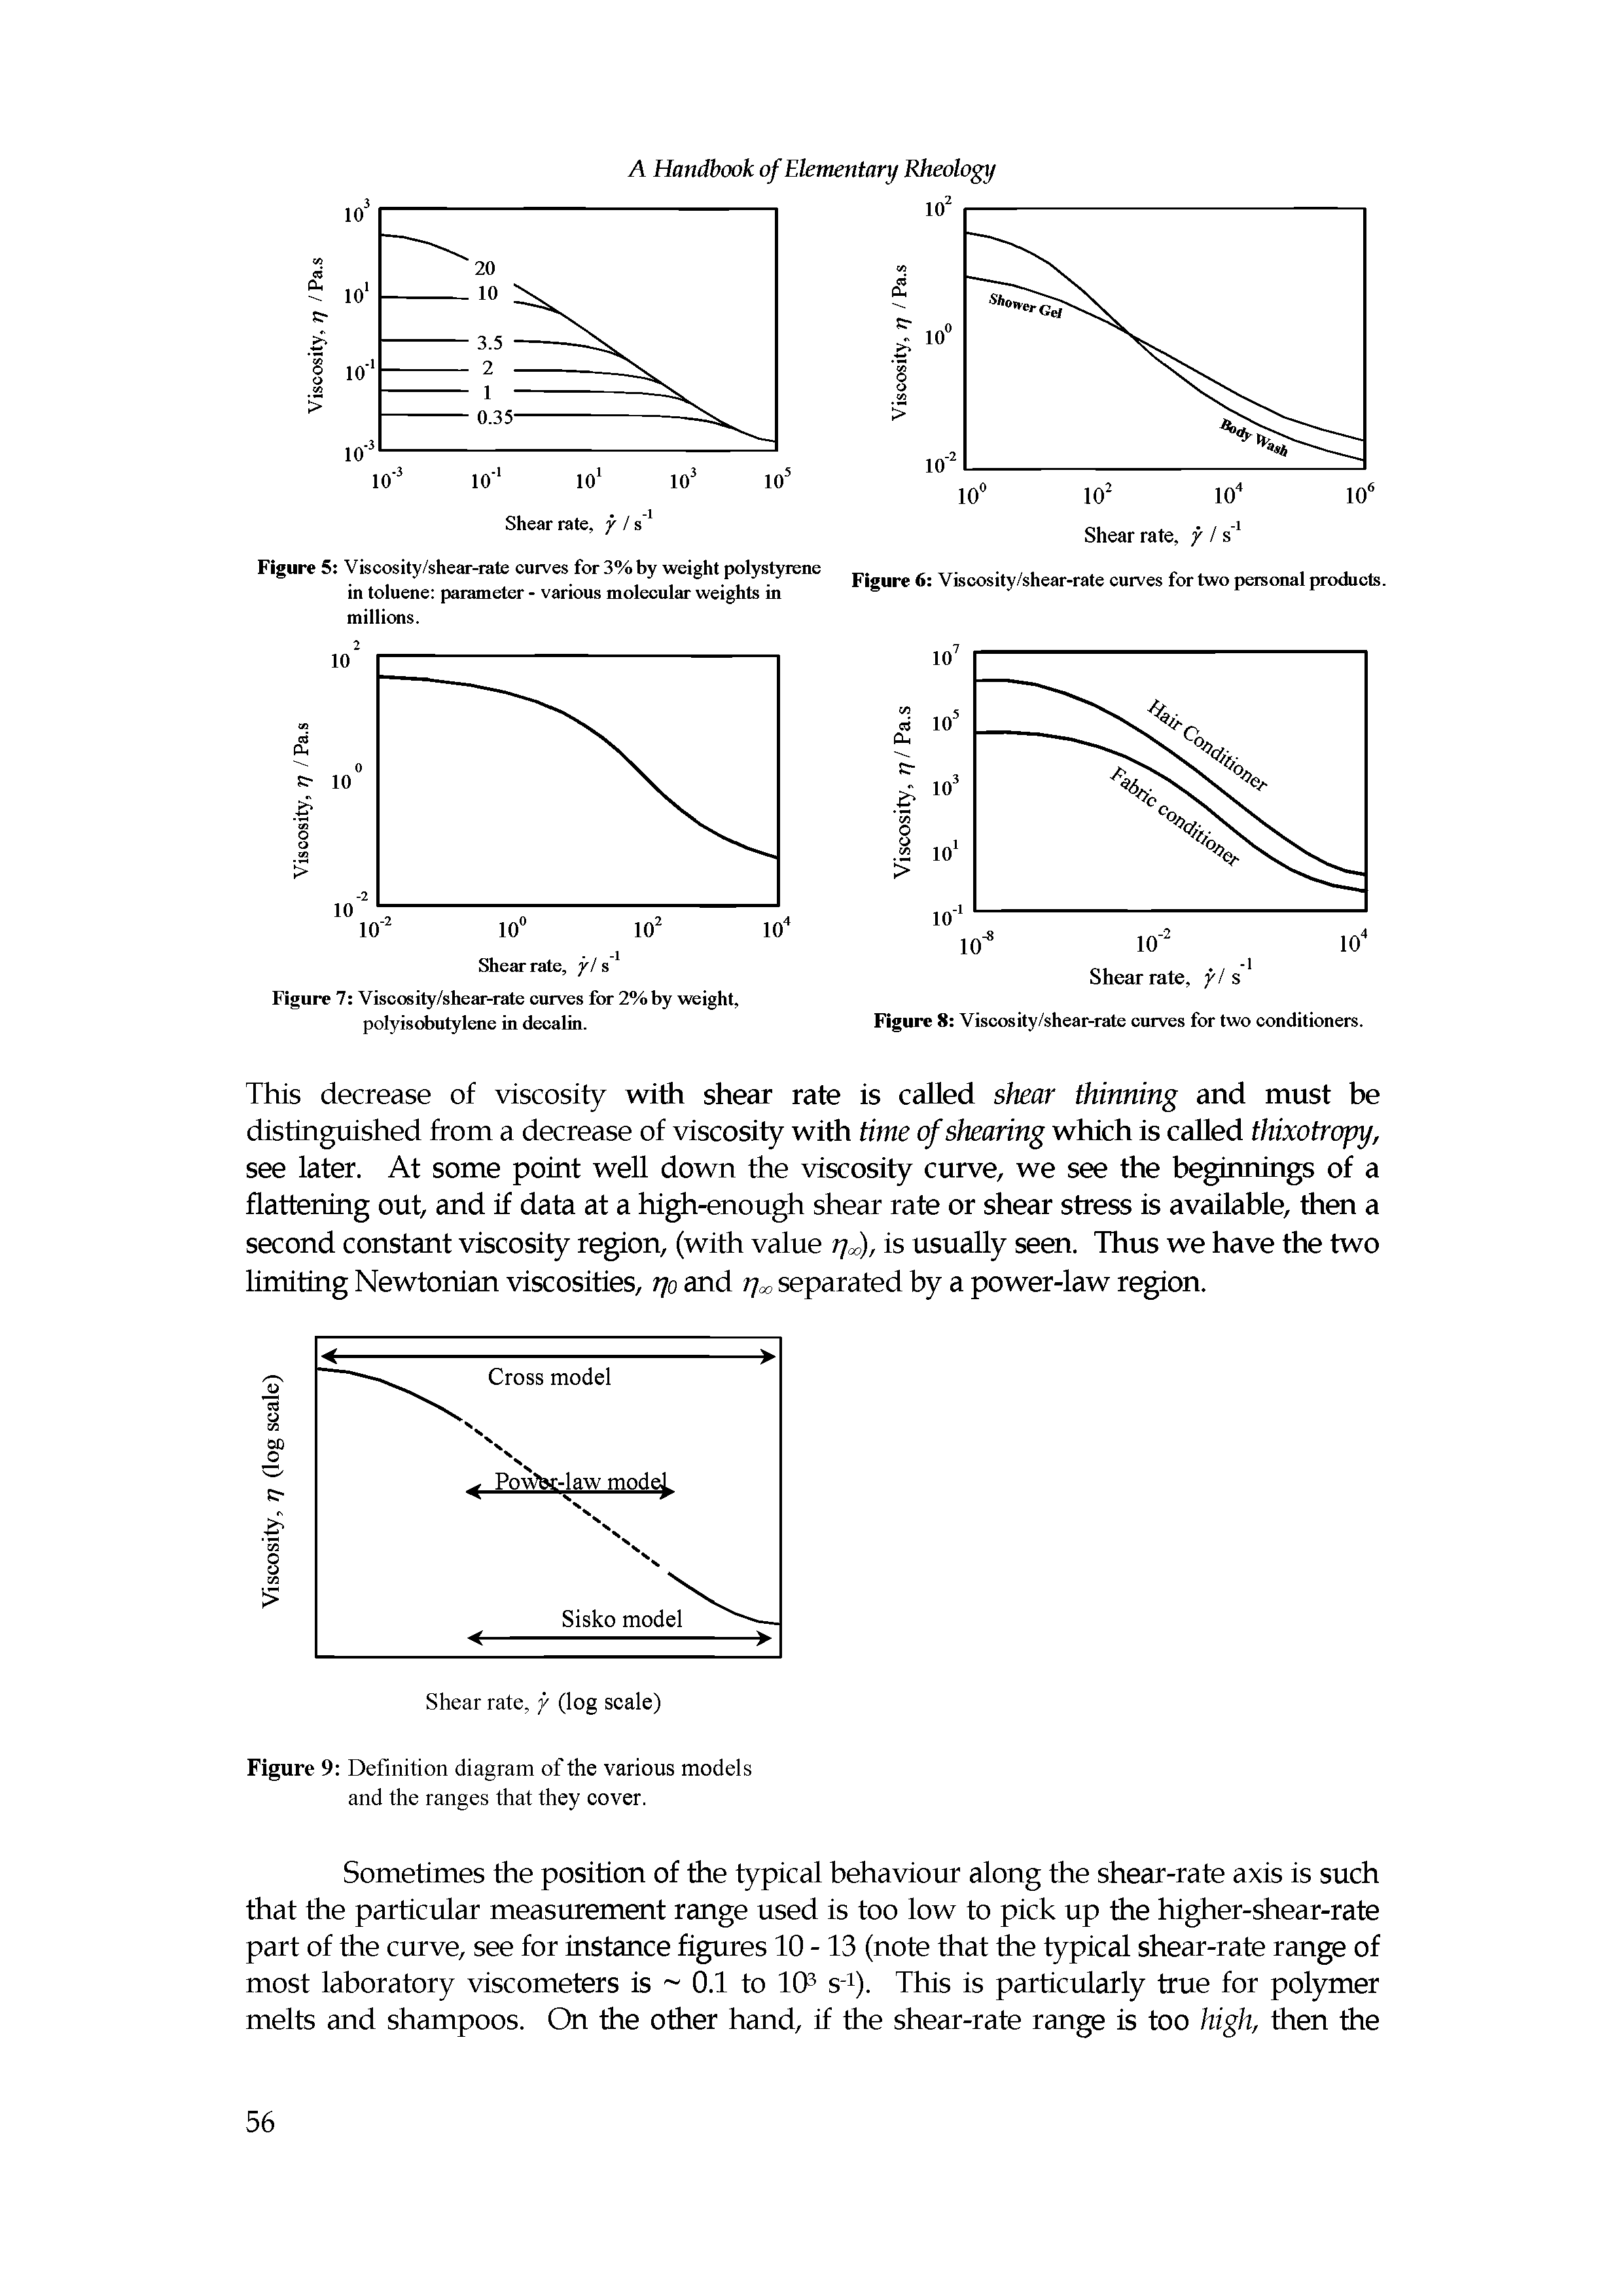 Figure 5 Viscosity/shear-rate curves for 3% by weight polystyrene in toluene parameter - various molecular weights in millions.